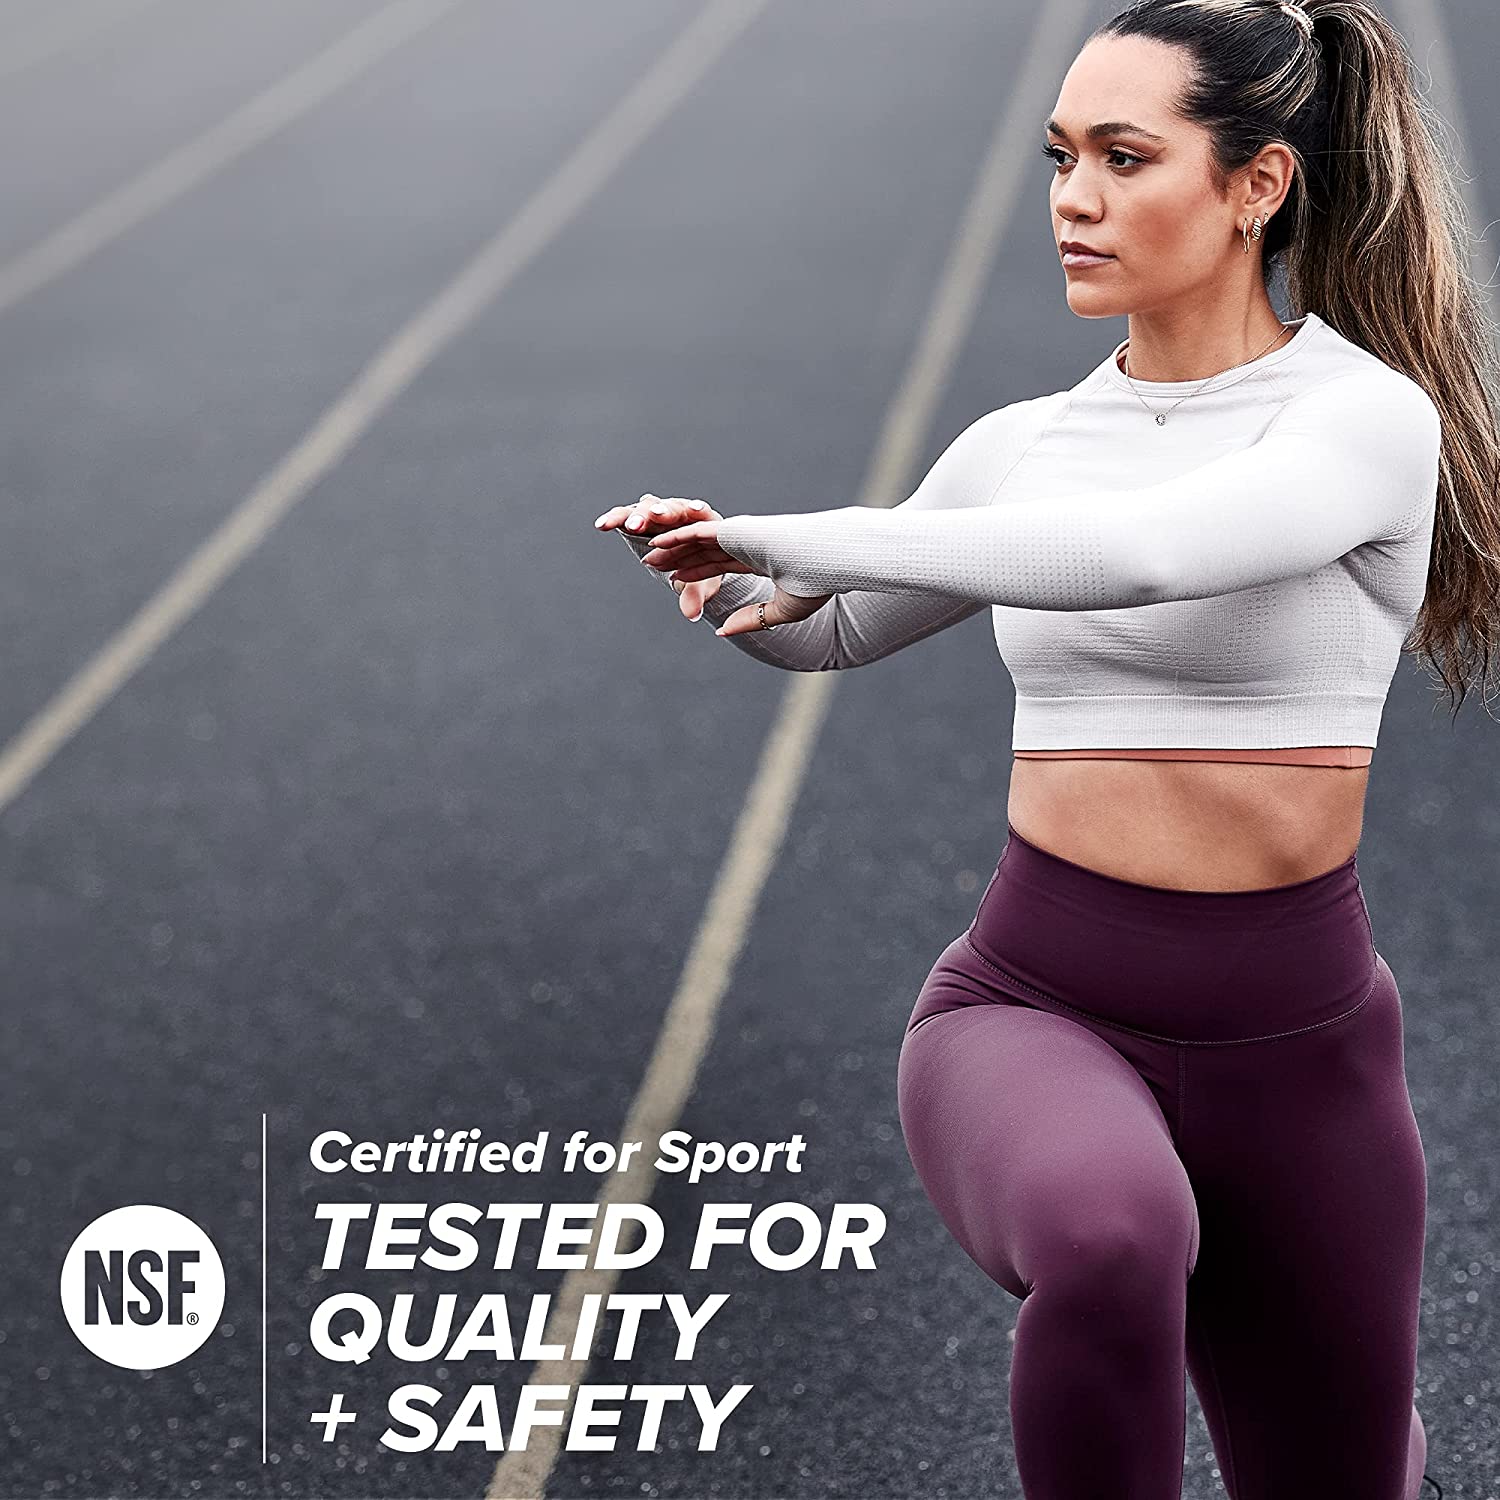 nsf certified bcaa recovery powder View 5